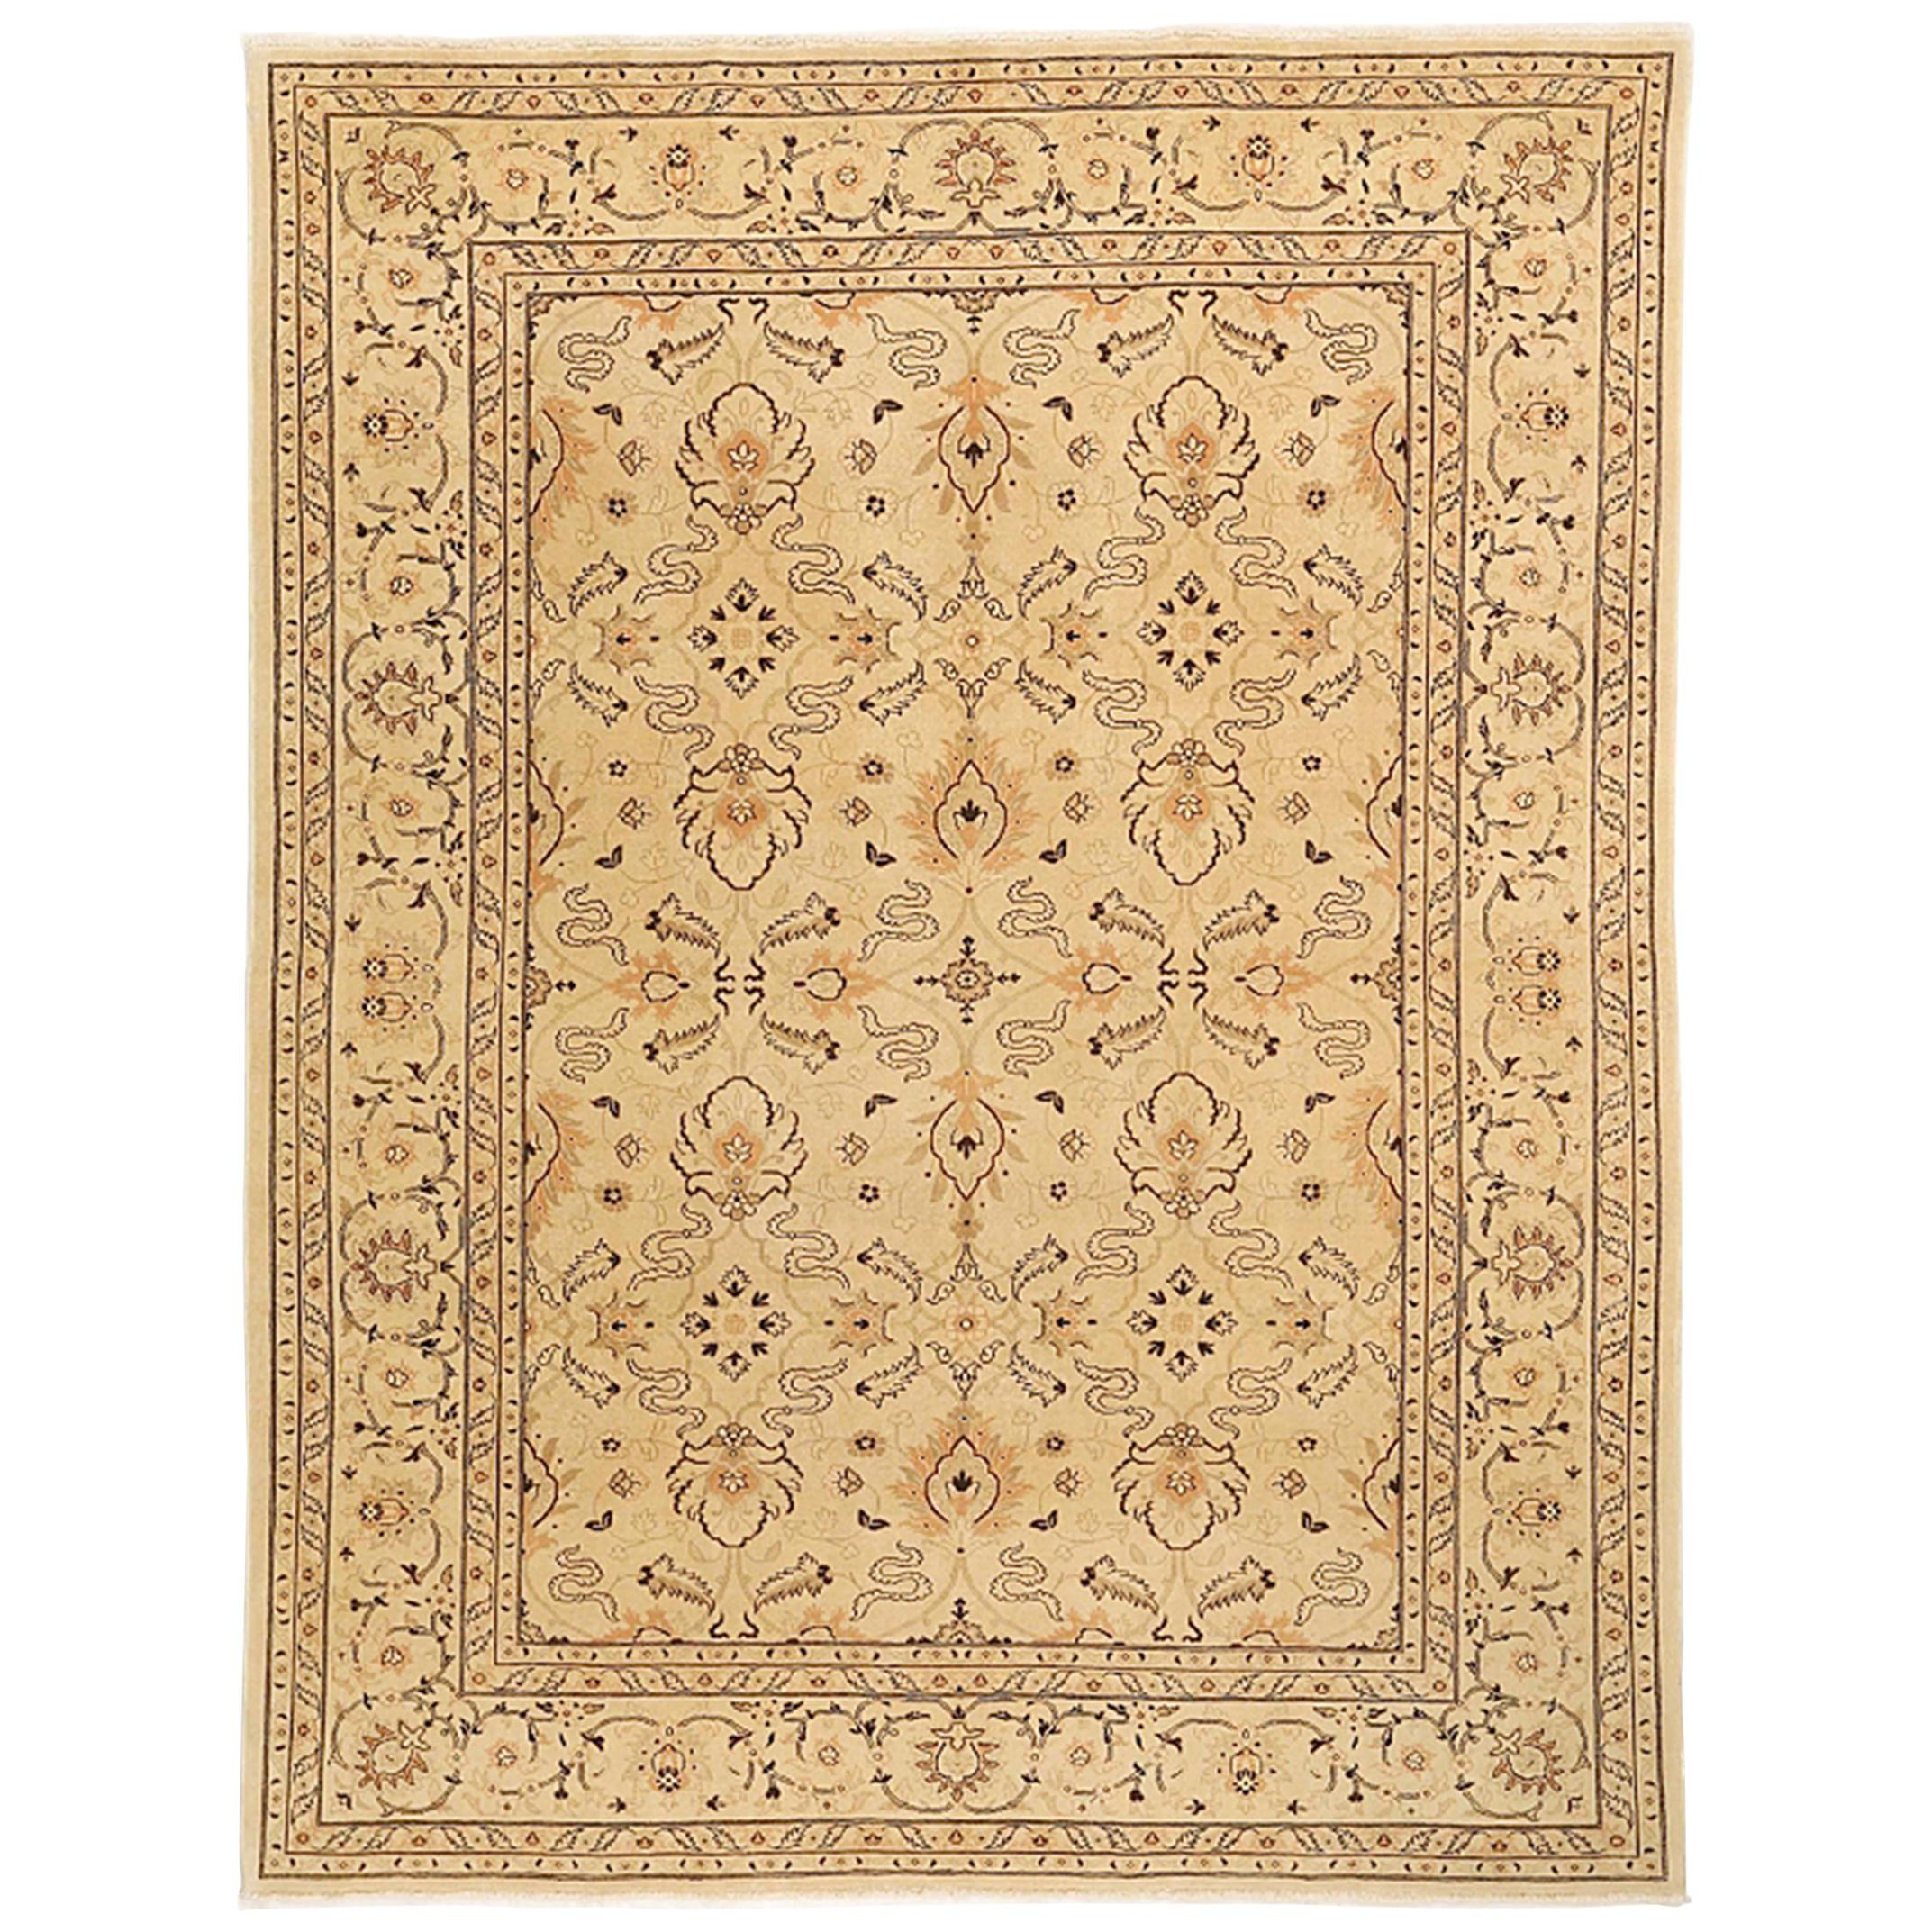 Contemporary Persian Tabriz Rug with Beige & Brown Flower Motifs on Ivory Field